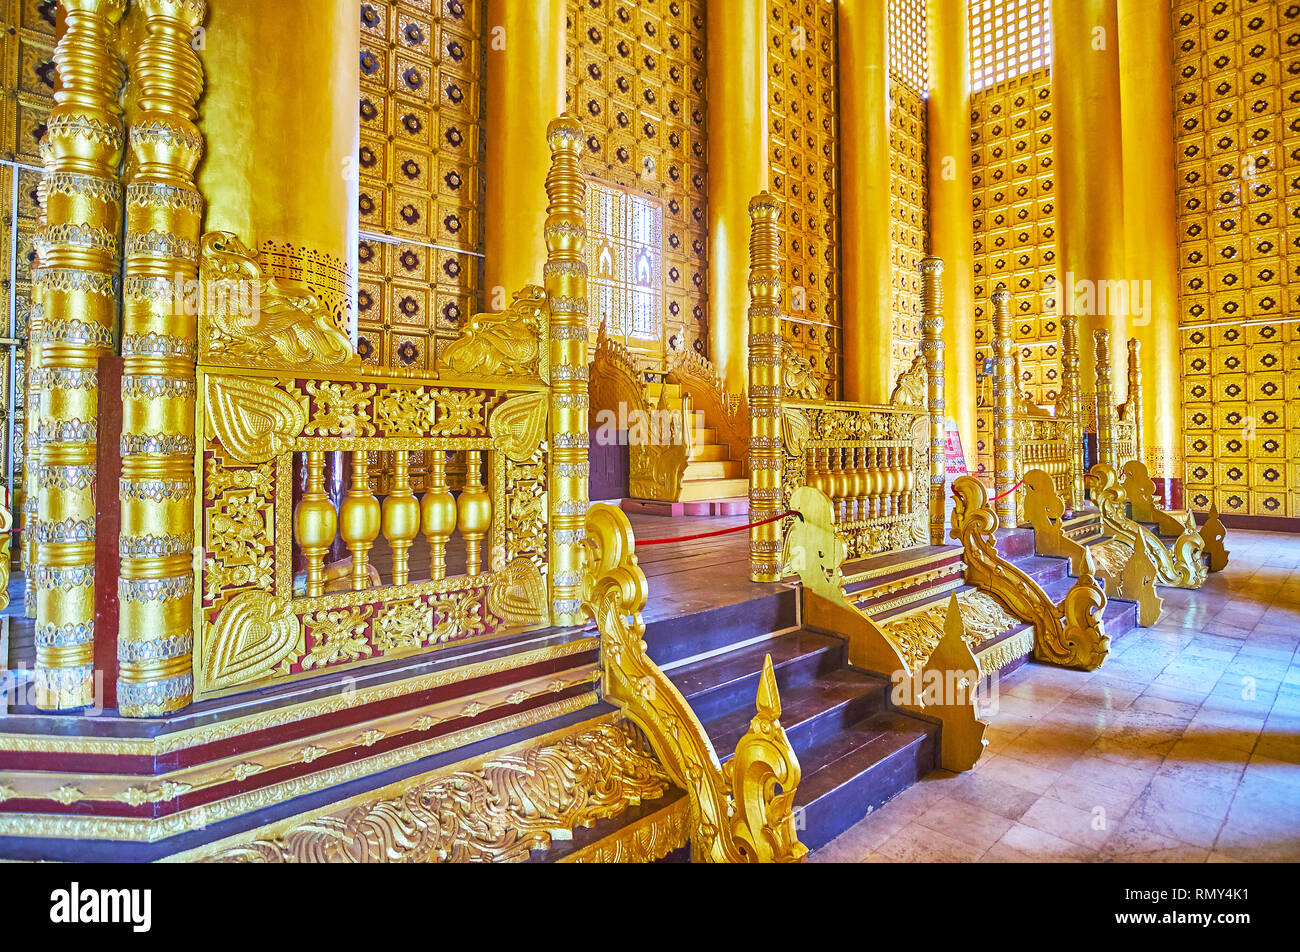 BAGO, MYANMAR - FEBRUARY 15, 2018: The Lion (Thihathana) Throne Hall of Kanbawzathadi Golden palace is decorated with intricate carved patterns, mirro Stock Photo